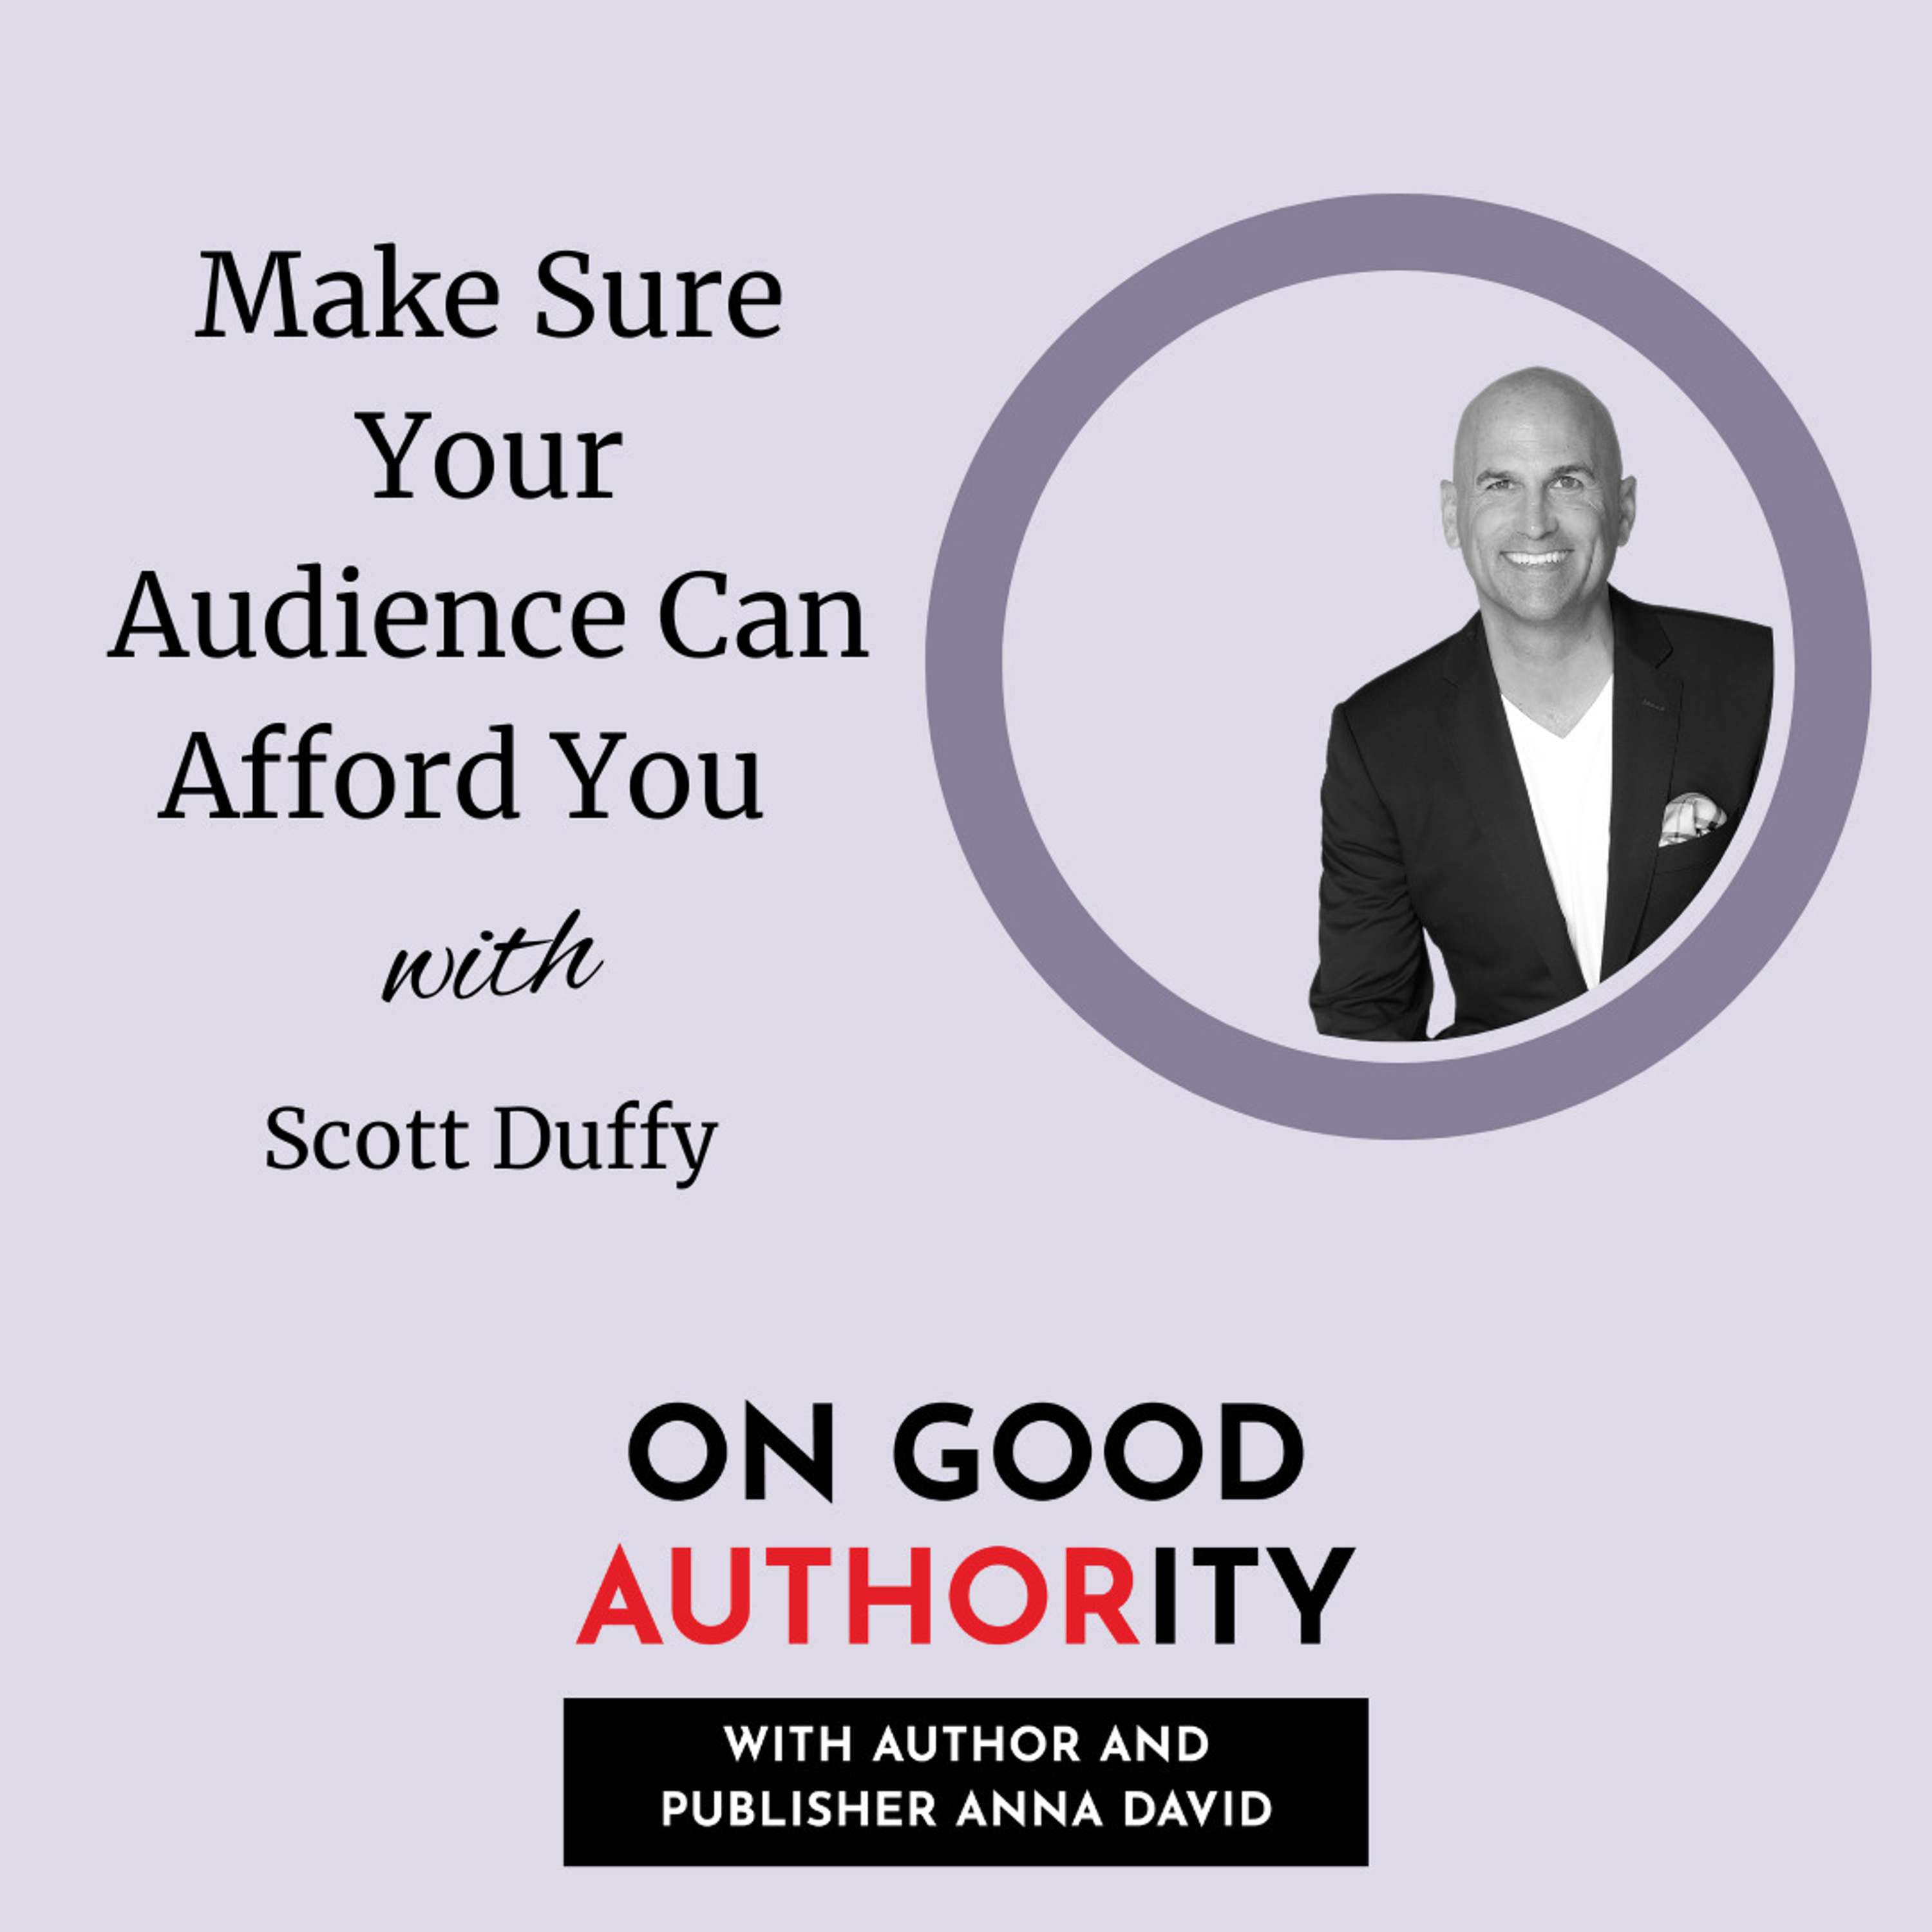 Make Sure Your Readers Can Afford You with Scott Duffy